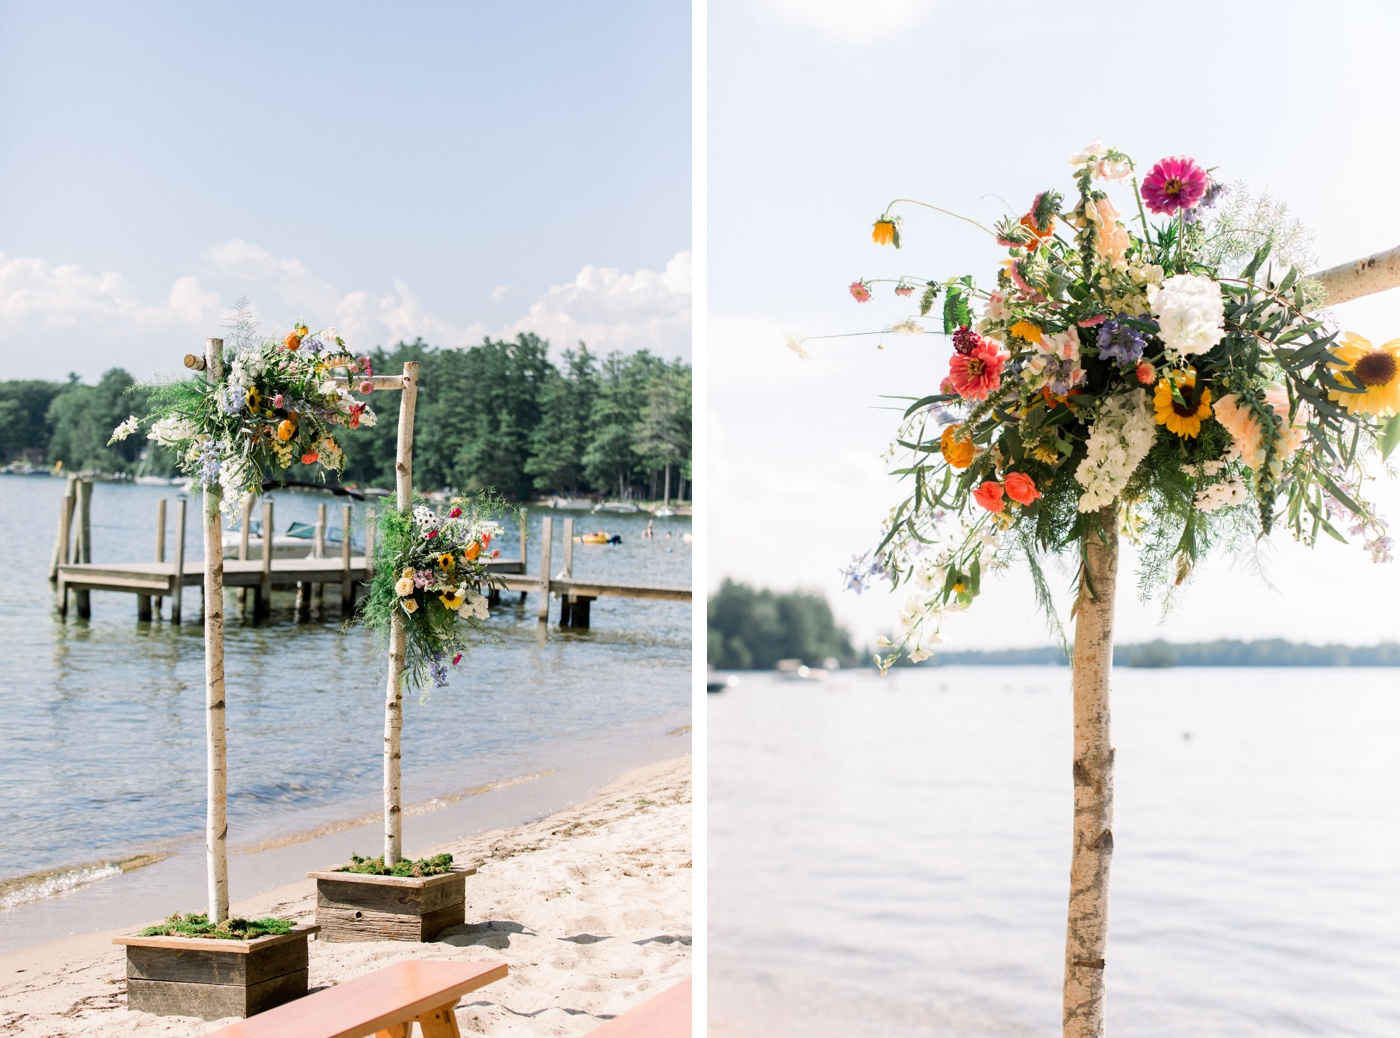 Birchwood arch decorated with colorful florals for a summer wedding ceremony